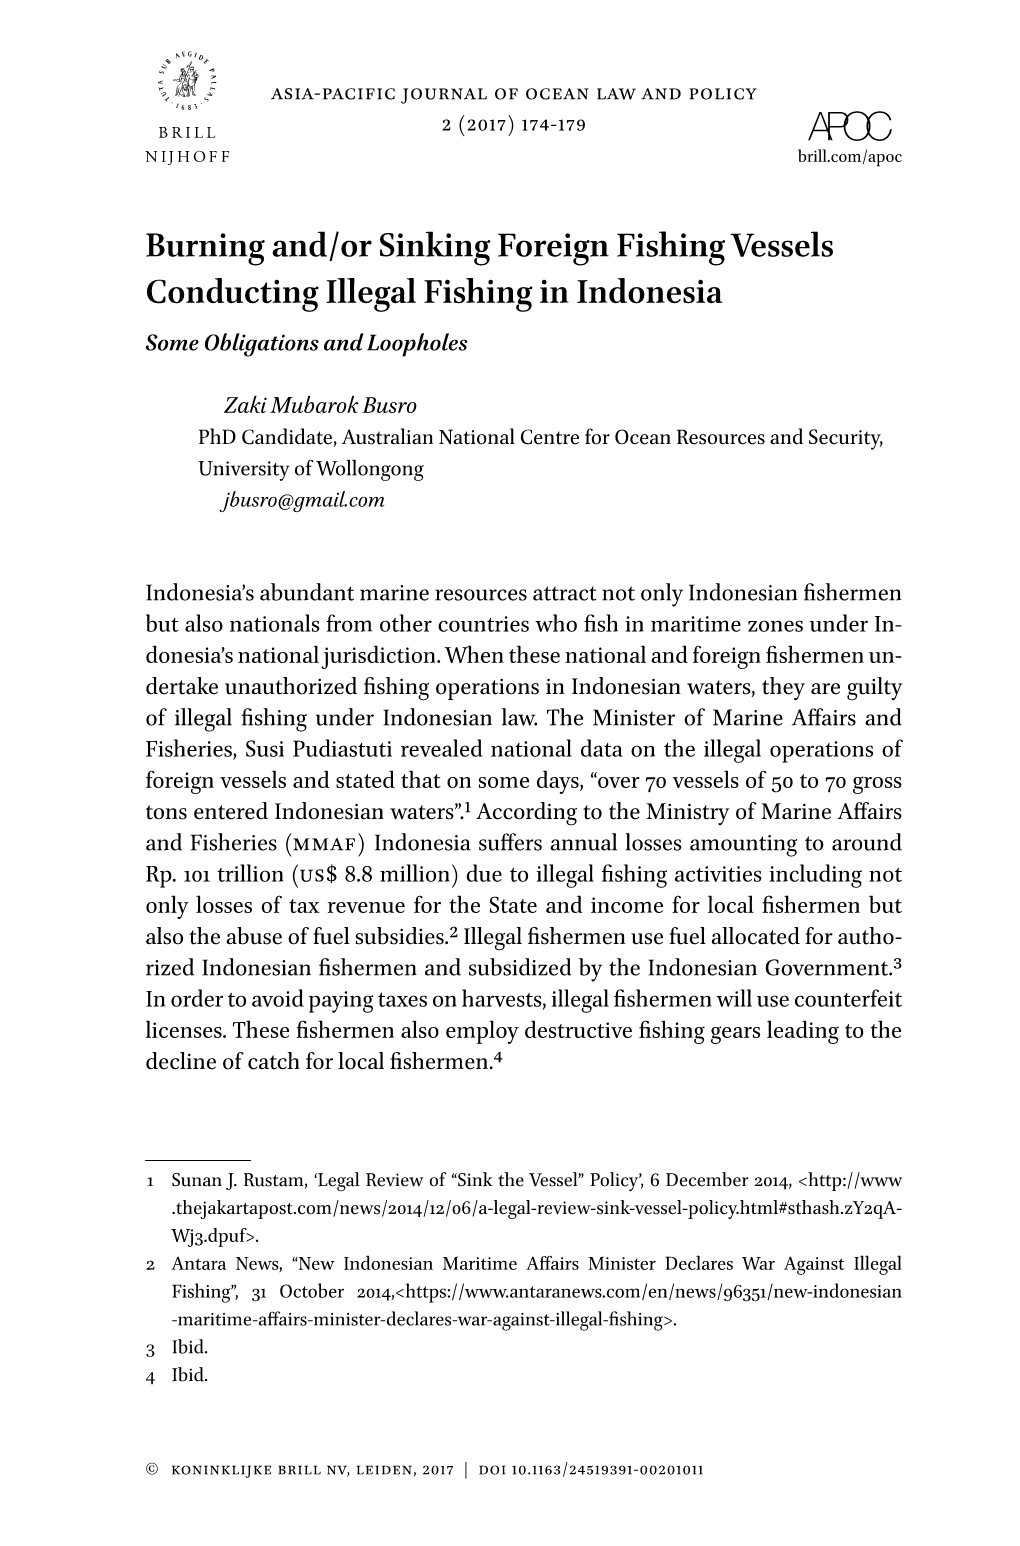 Burning And/Or Sinking Foreign Fishing Vessels Conducting Illegal Fishing in Indonesia Some Obligations and Loopholes